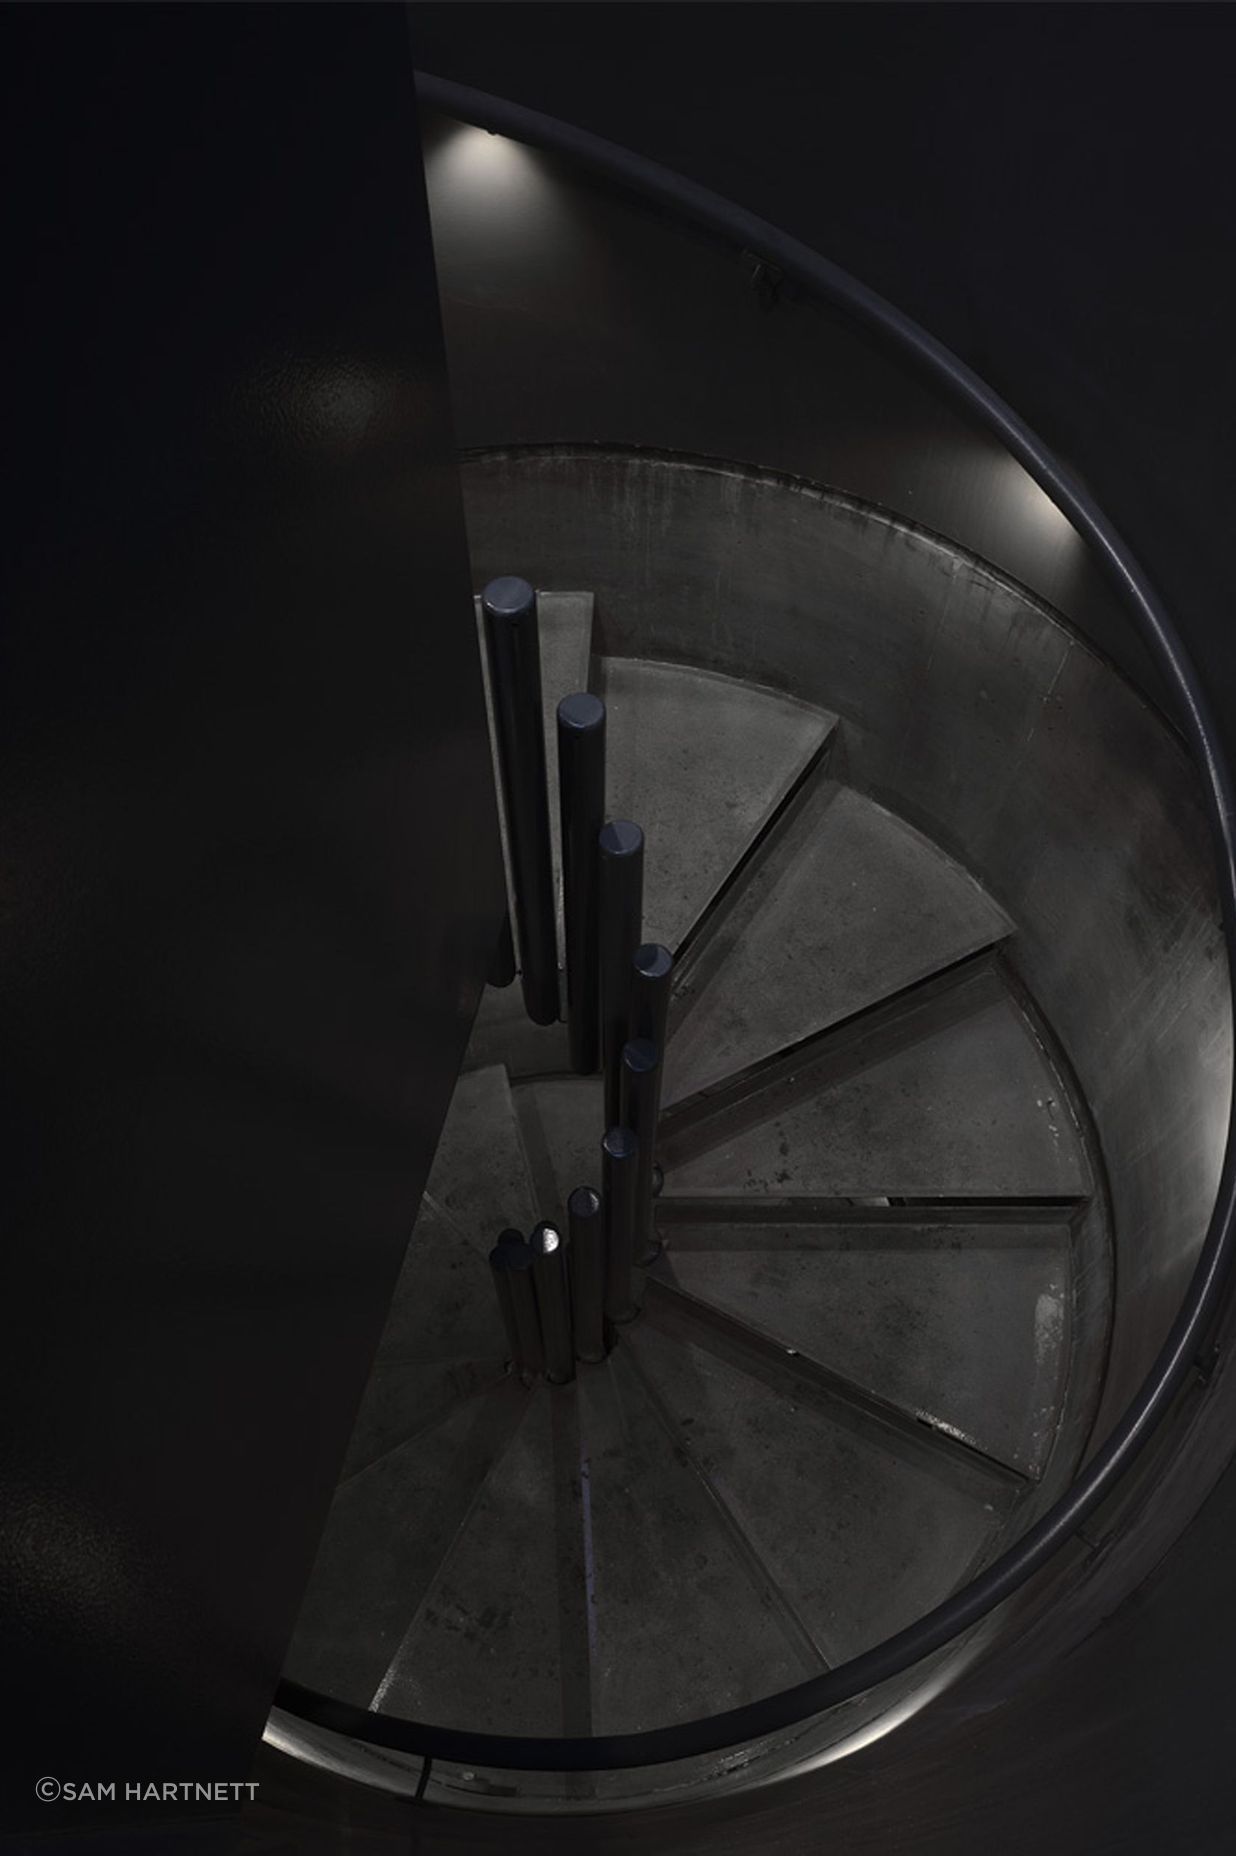 The tower’s spiral staircase, protected by the circular precast concrete.